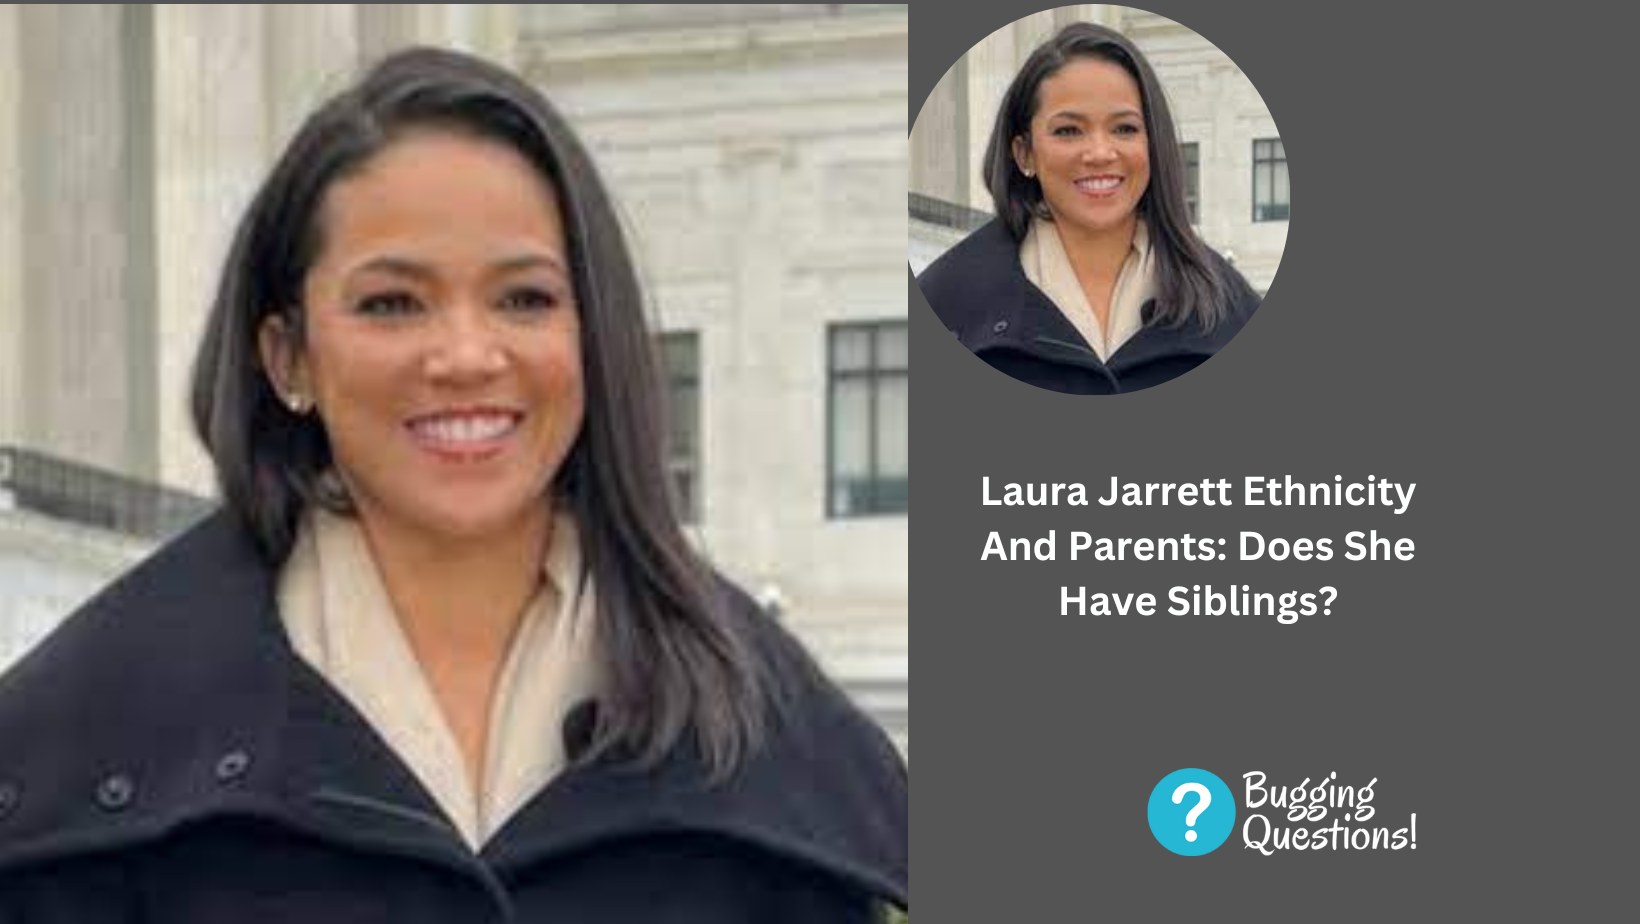 Laura Jarrett Ethnicity And Parents: Does She Have Siblings?